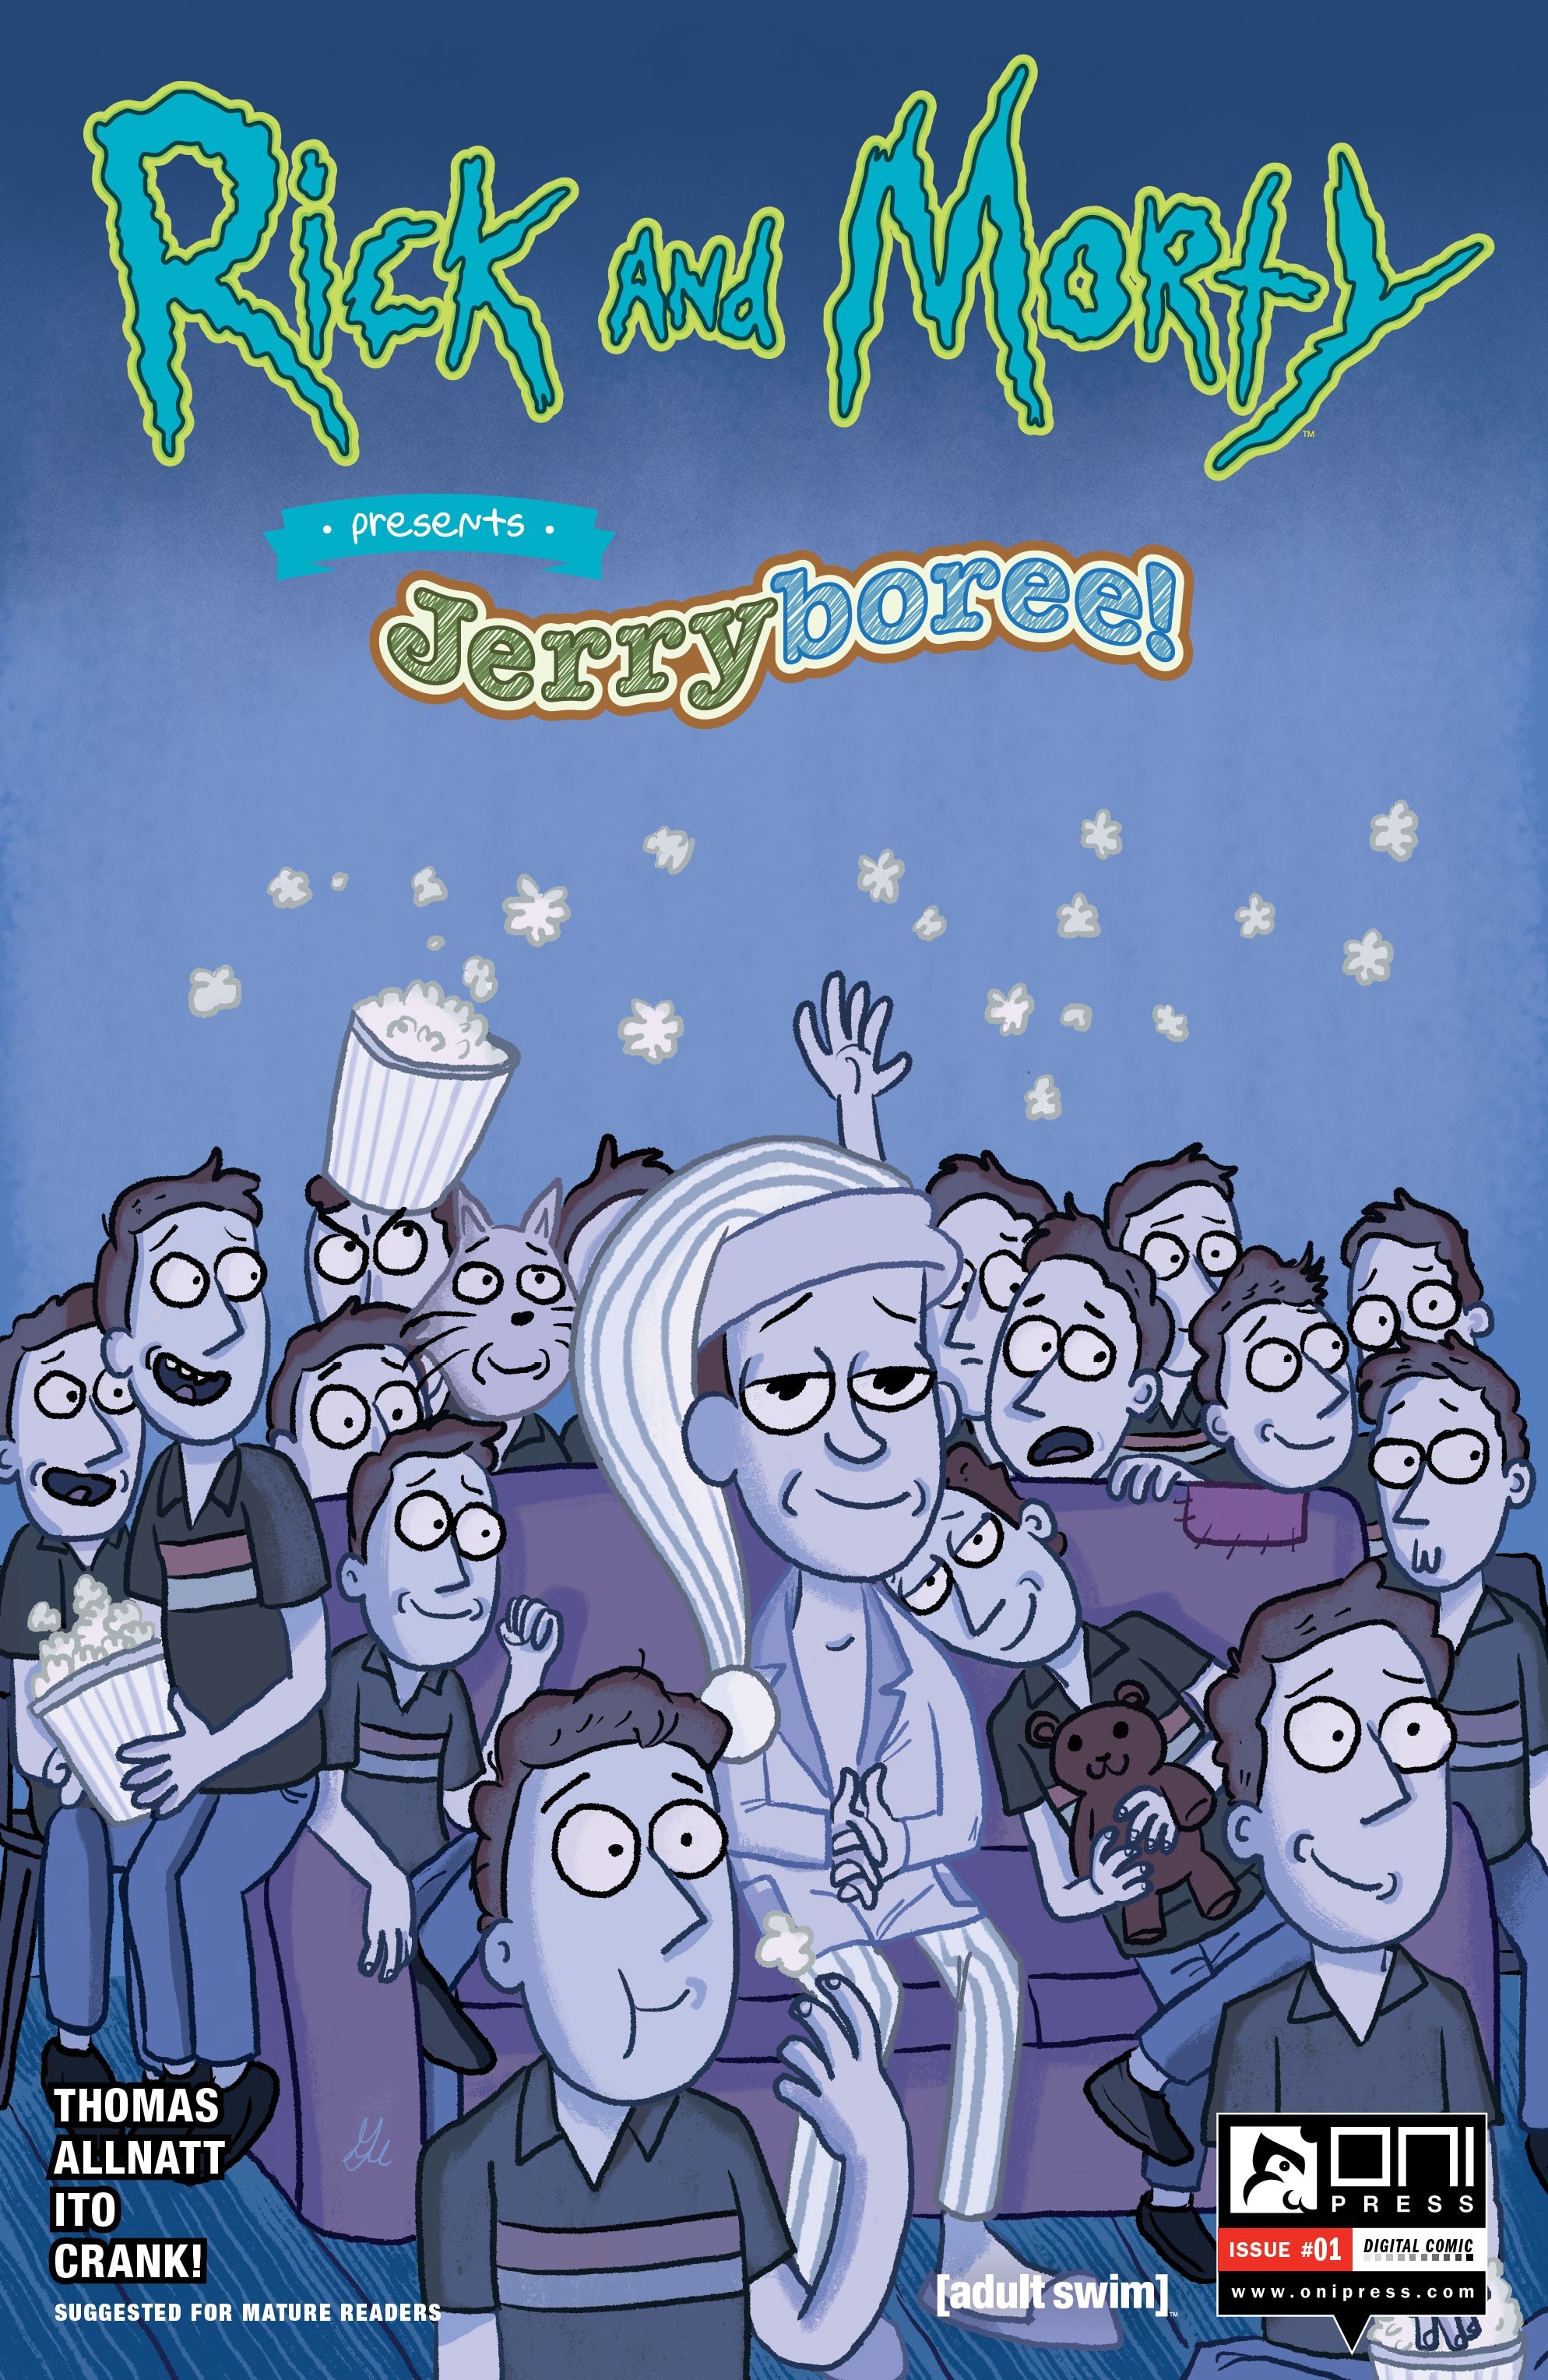 Read online Rick and Morty Presents: Jerryboree comic -  Issue # Full - 1